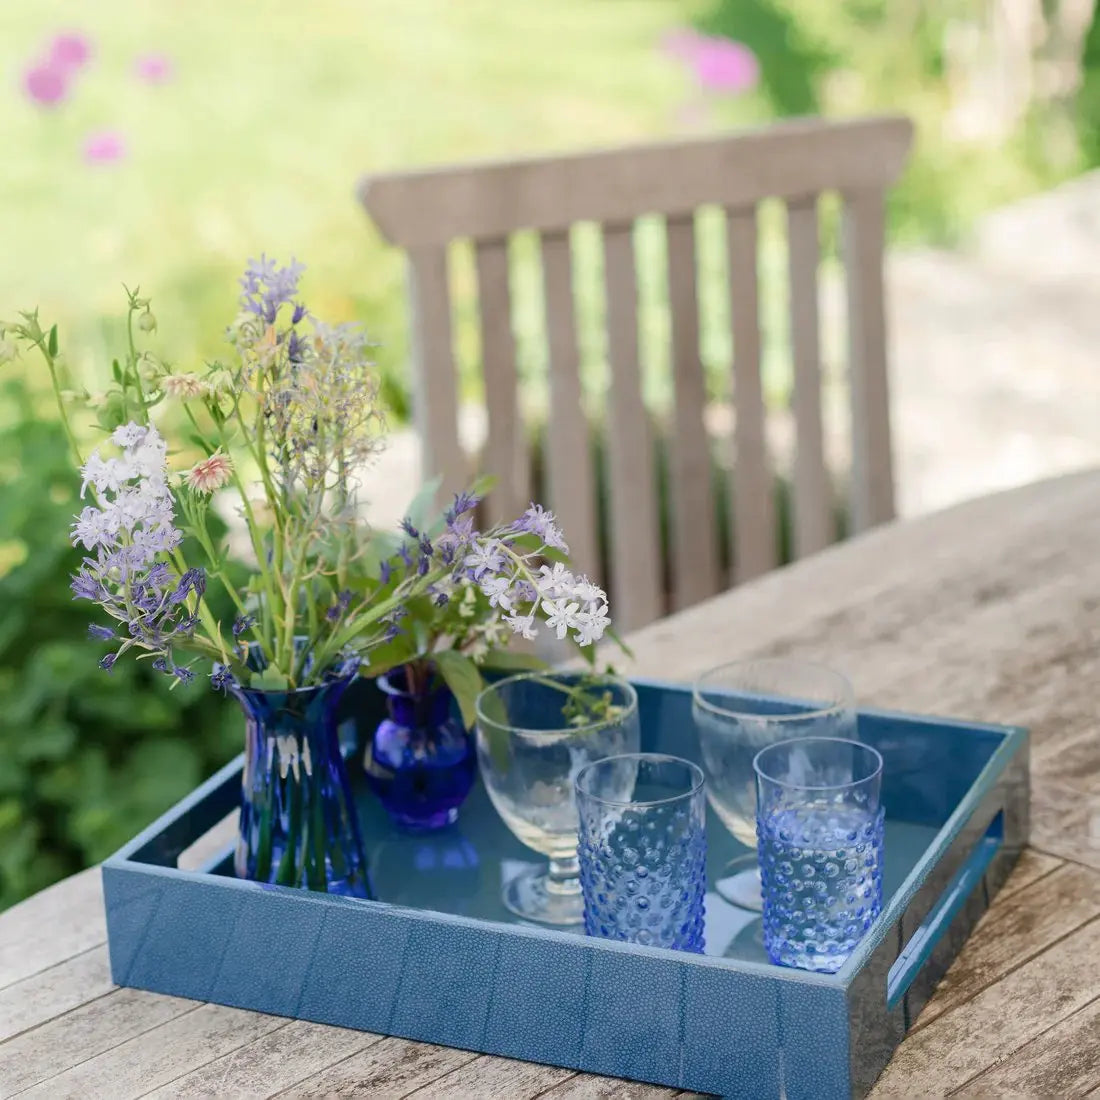 Addison Ross Lacquered Serving Tray in Blue Shagreen set on a table outdoors